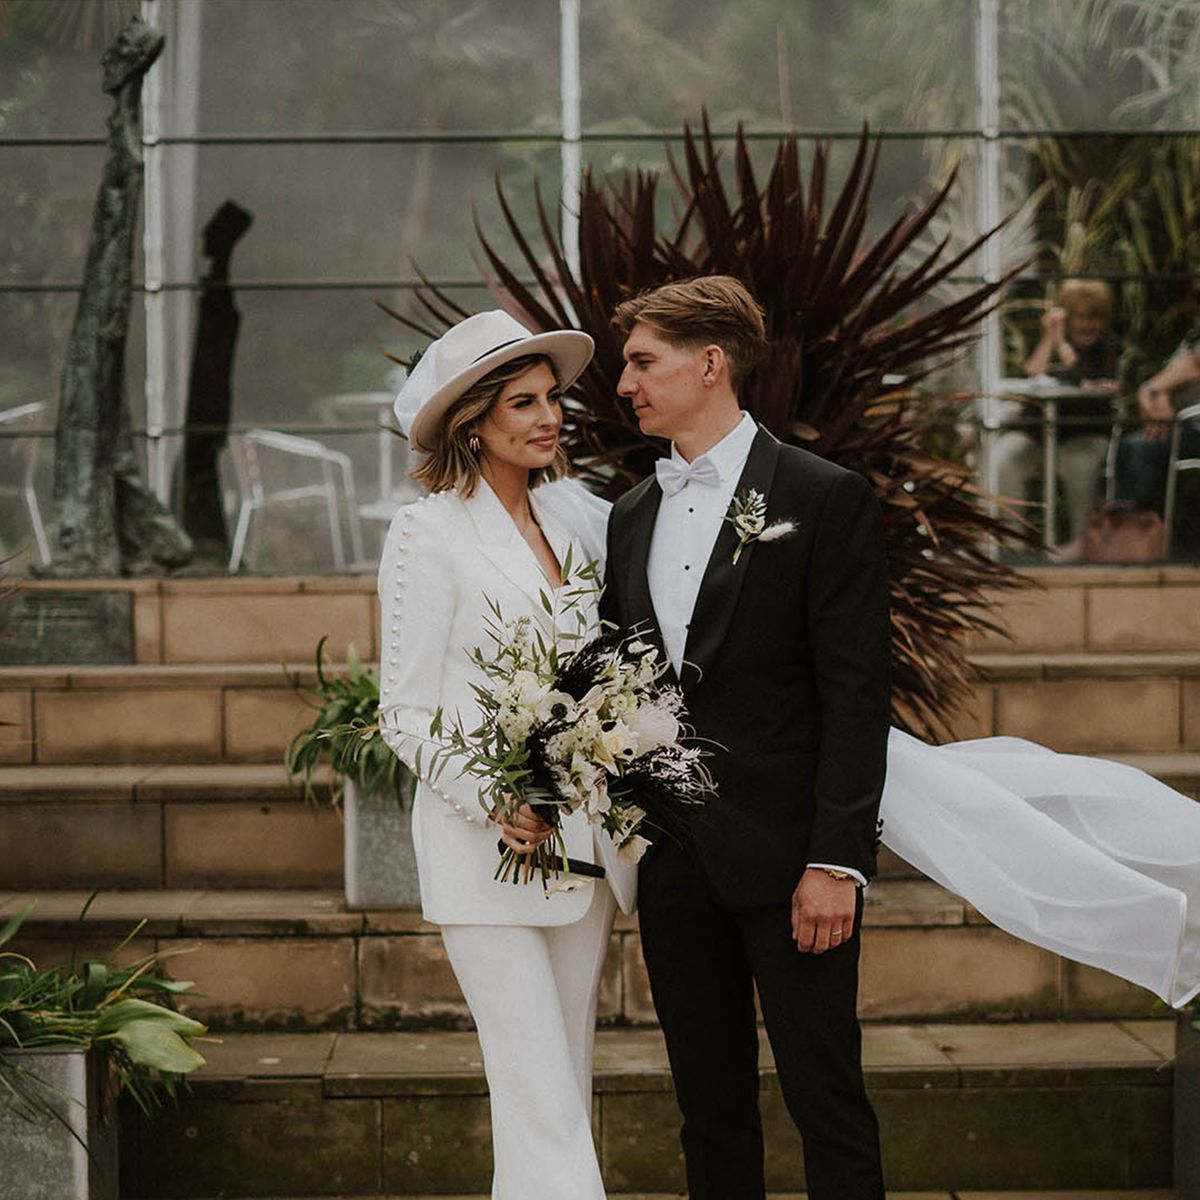 Nadine Merabi Trouser Suit With Pearls For Town Hall Wedding